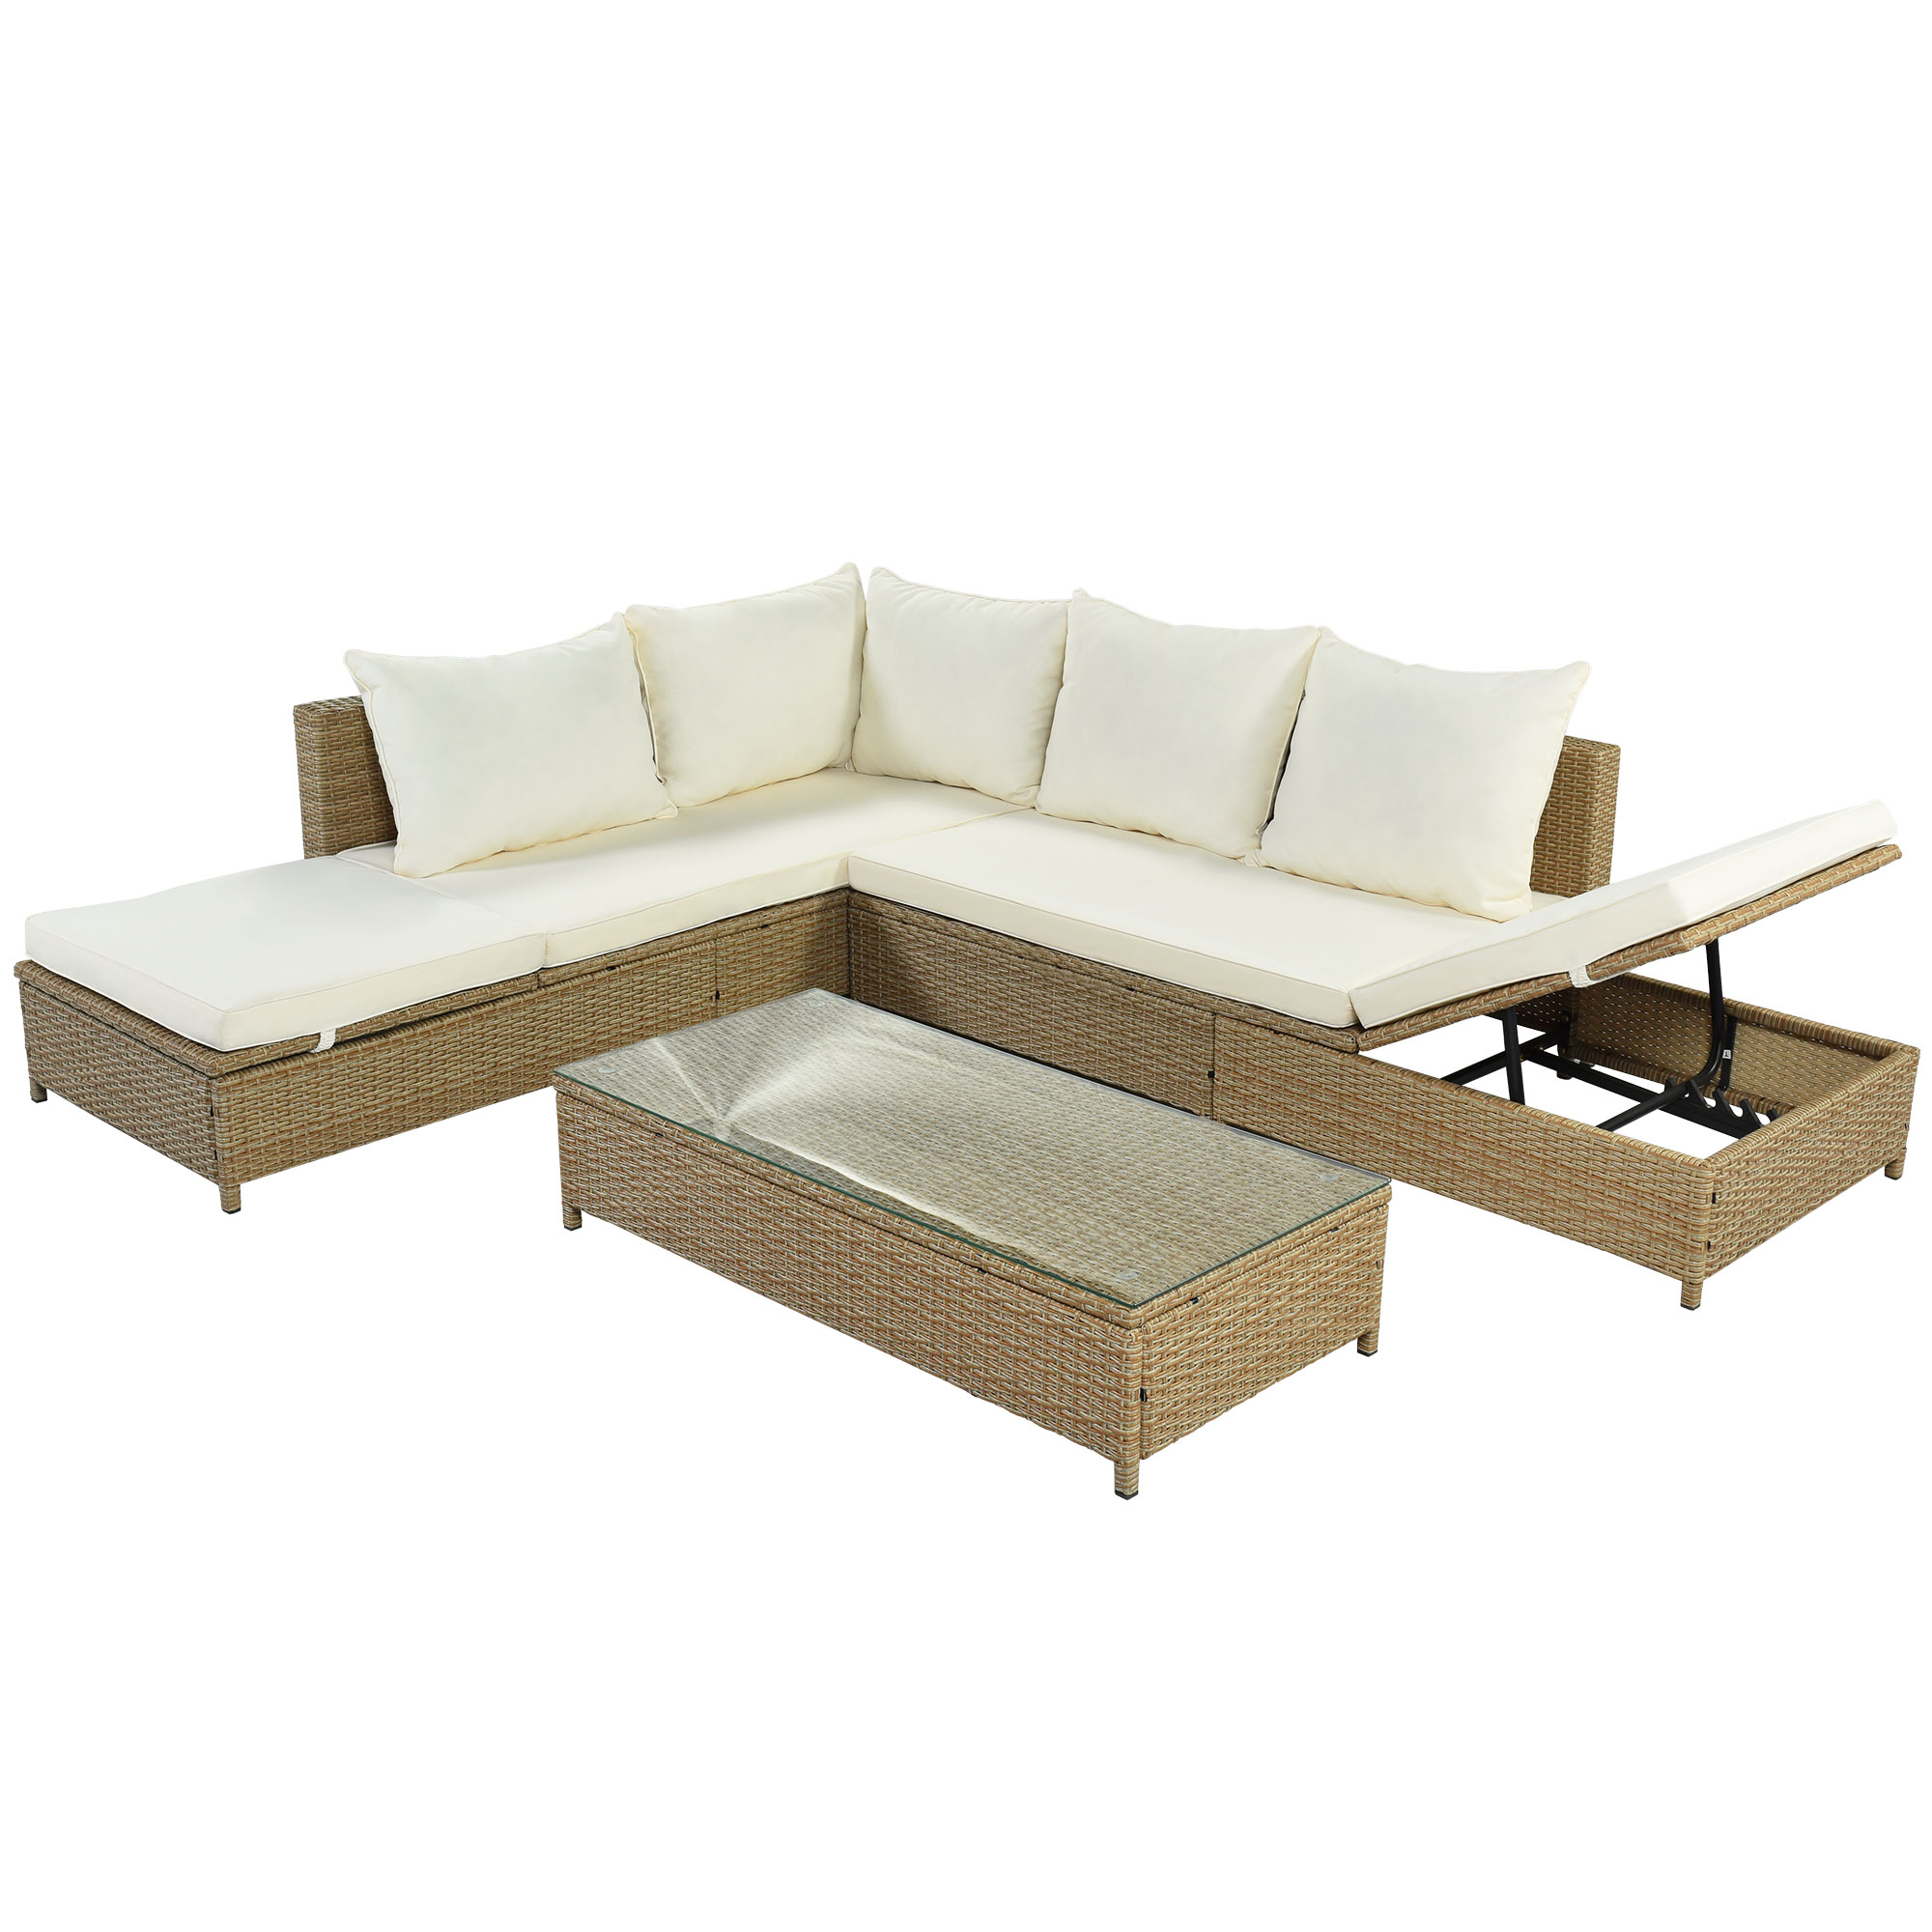 TOPMAX Patio 3-Piece Rattan Sofa Set All Weather PE Wicker Sectional Set with Adjustable Chaise Lounge Frame and Tempered Glass Table, Natural Brown+ Beige Cushion - image 5 of 9